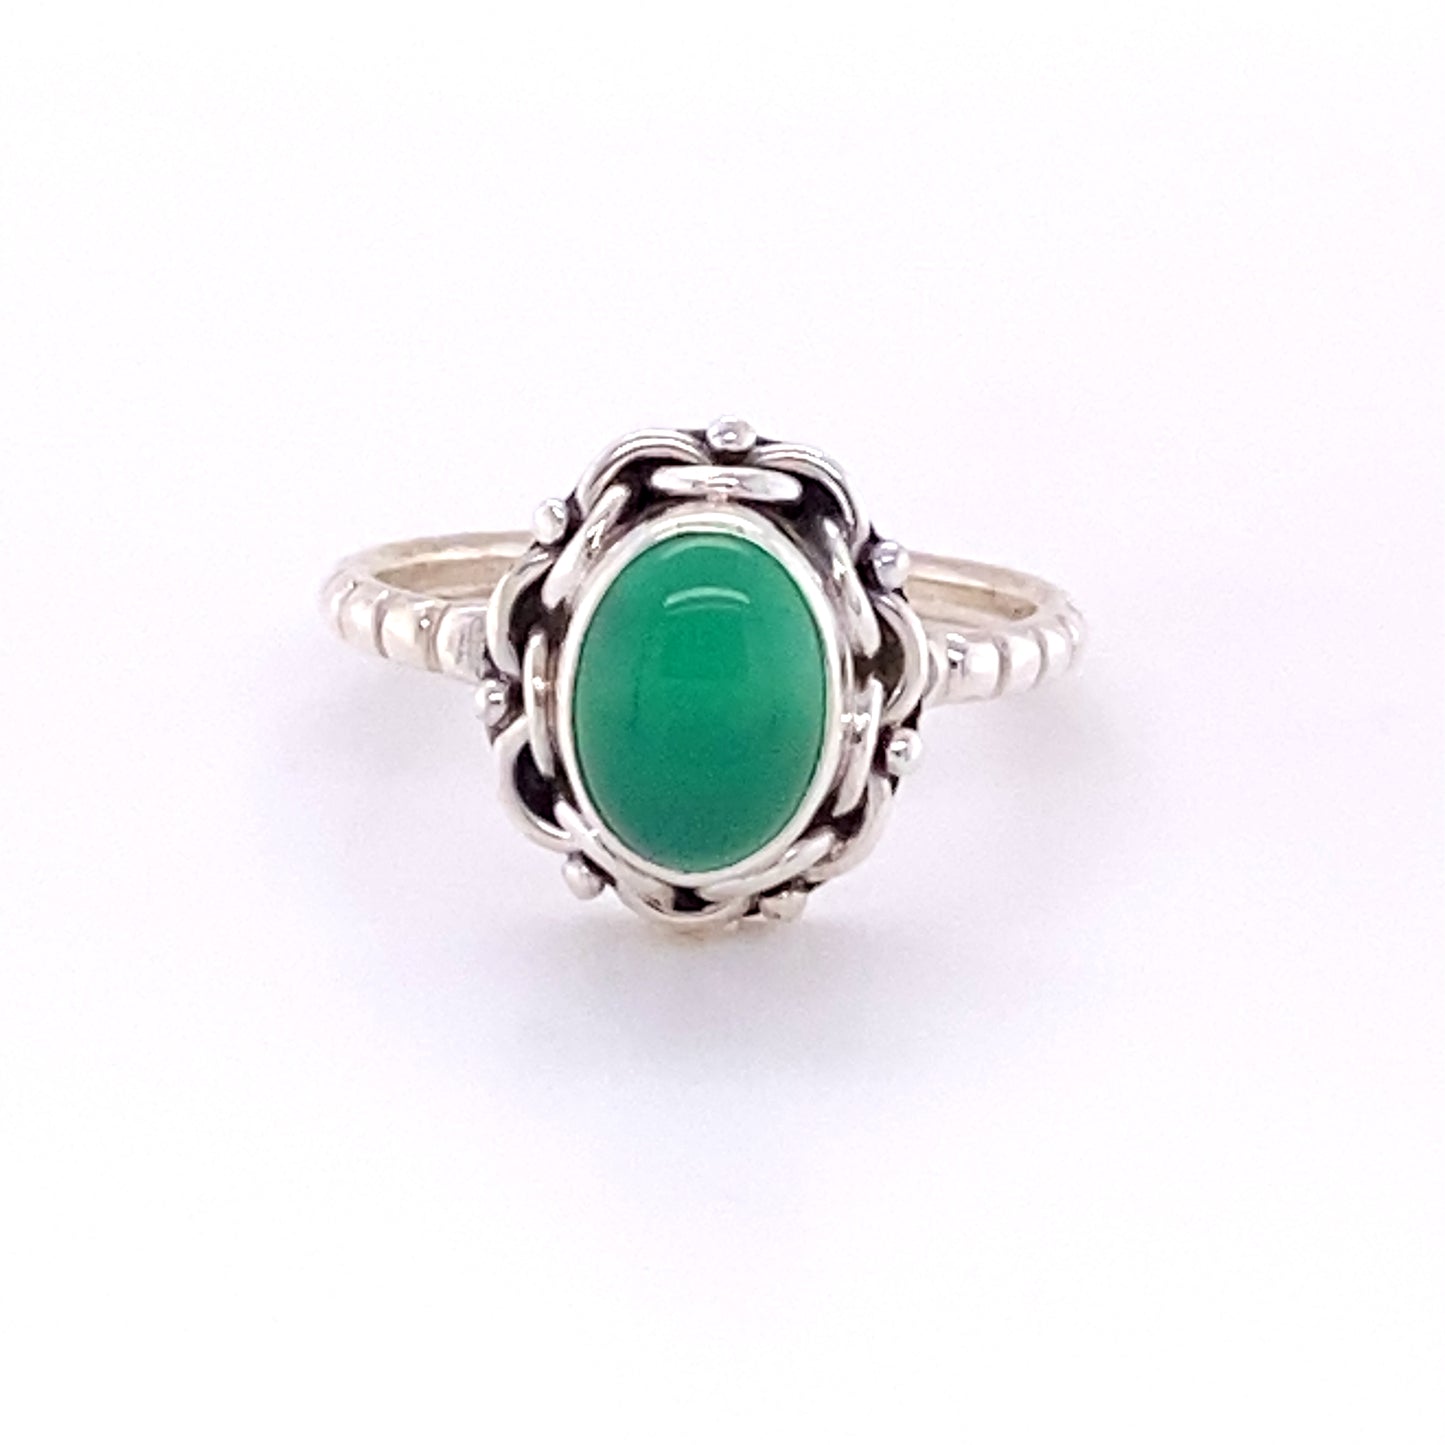 A Natural Oval Gemstone Ring with Intricate chain Border and Textured Band with a green jade stone.